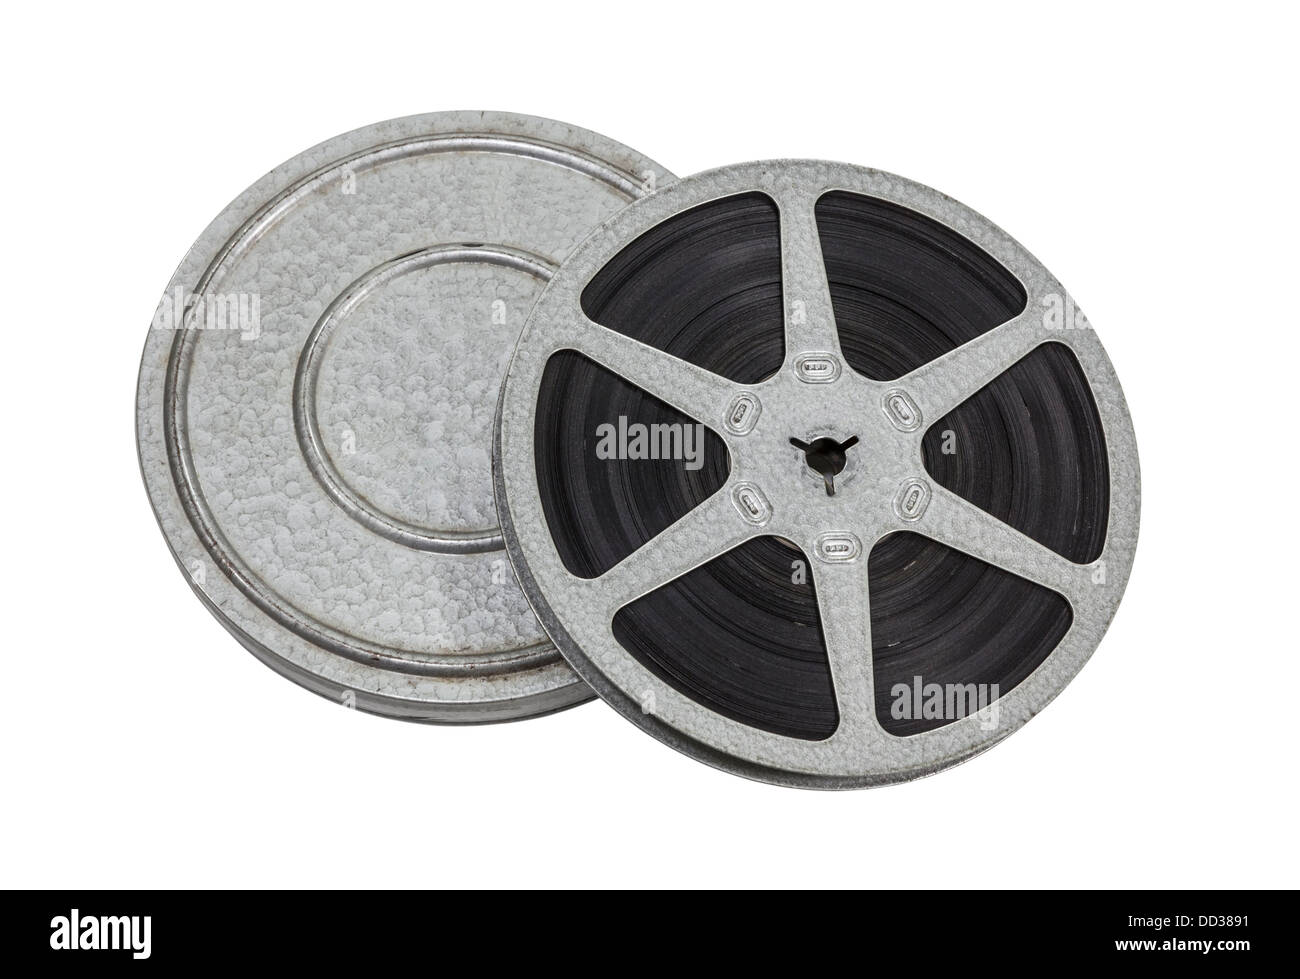 Vintage Metal Reel of 8mm Film Uncoils Against Negative Space Stock Image -  Image of industry, creativity: 196796573